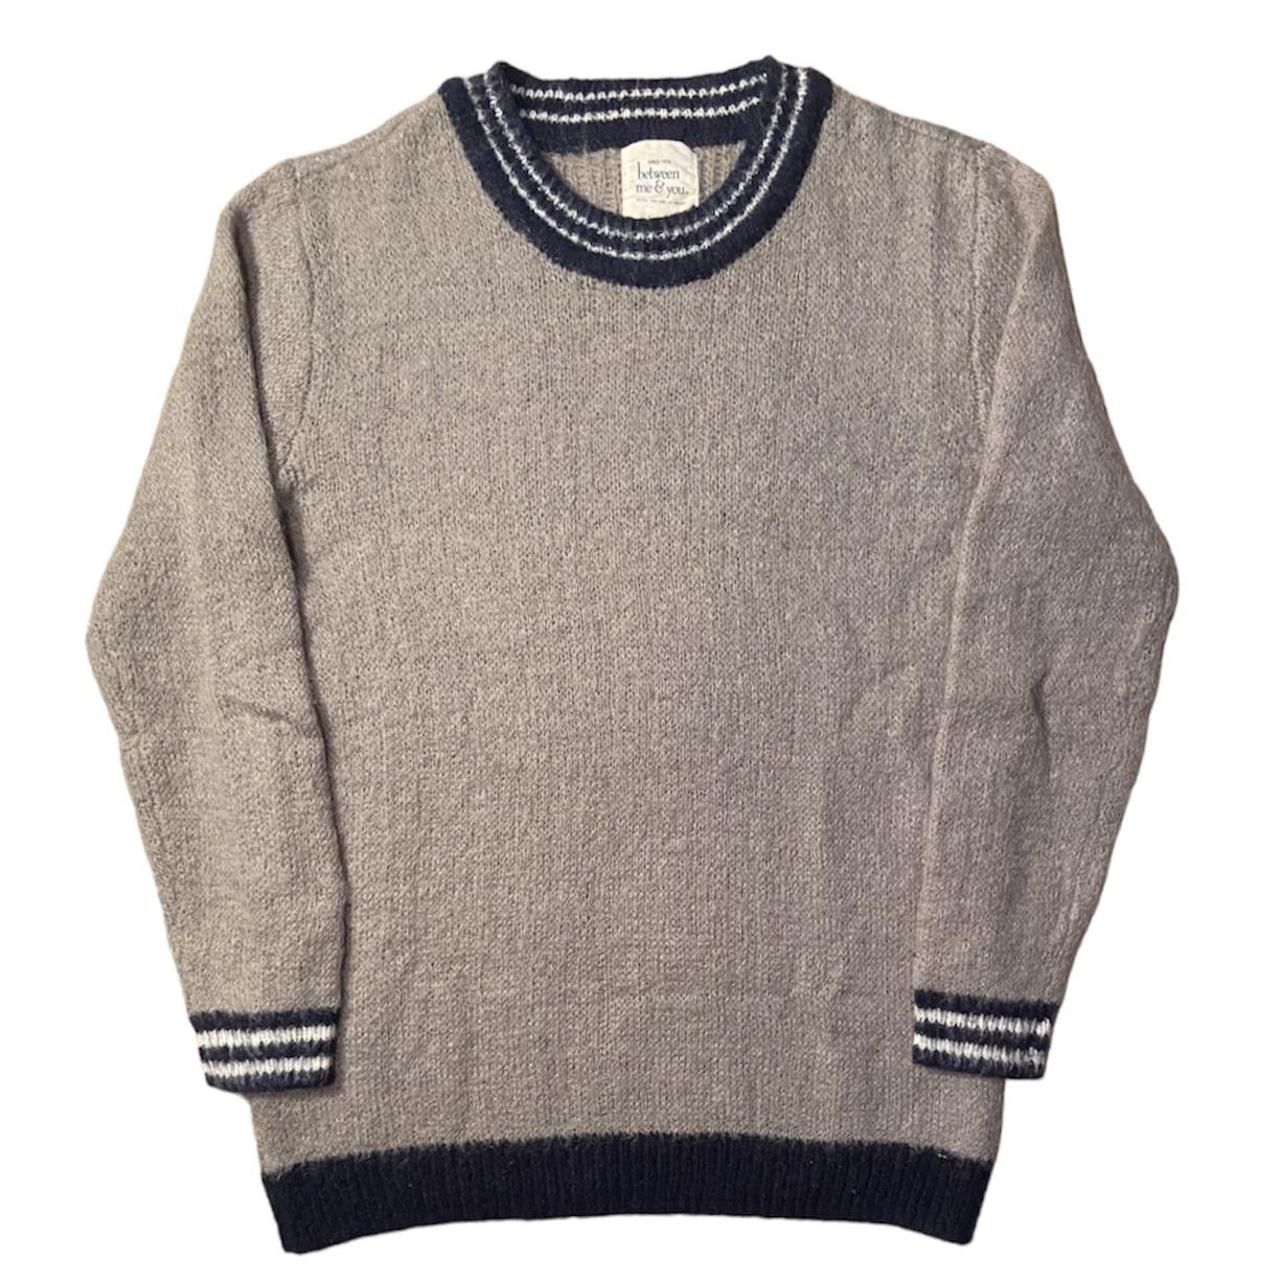 Hysteric Glamour Men's Grey and Blue Jumper